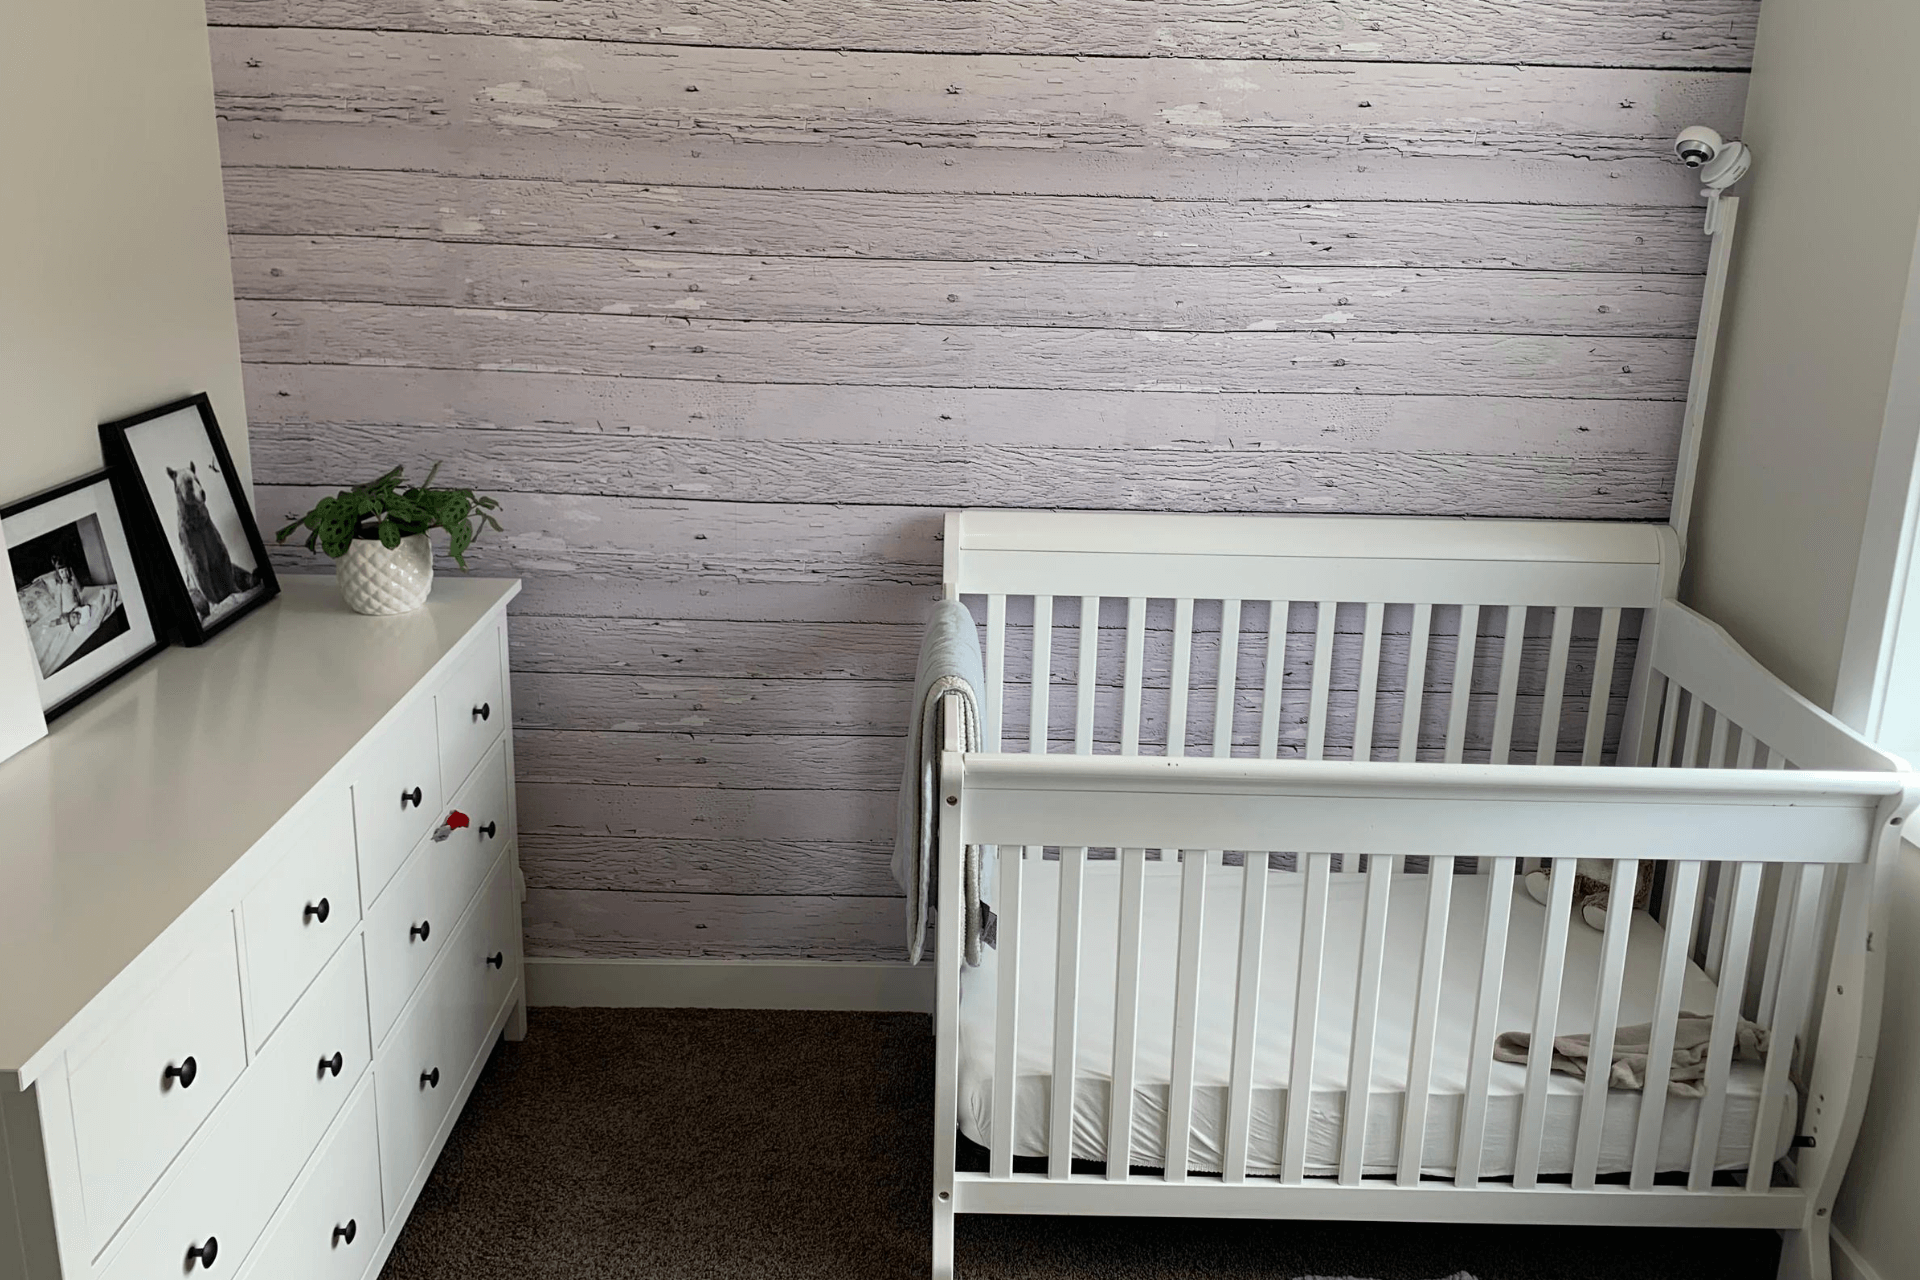 Rustic wallpapers - an obligatory addition to a country cottage